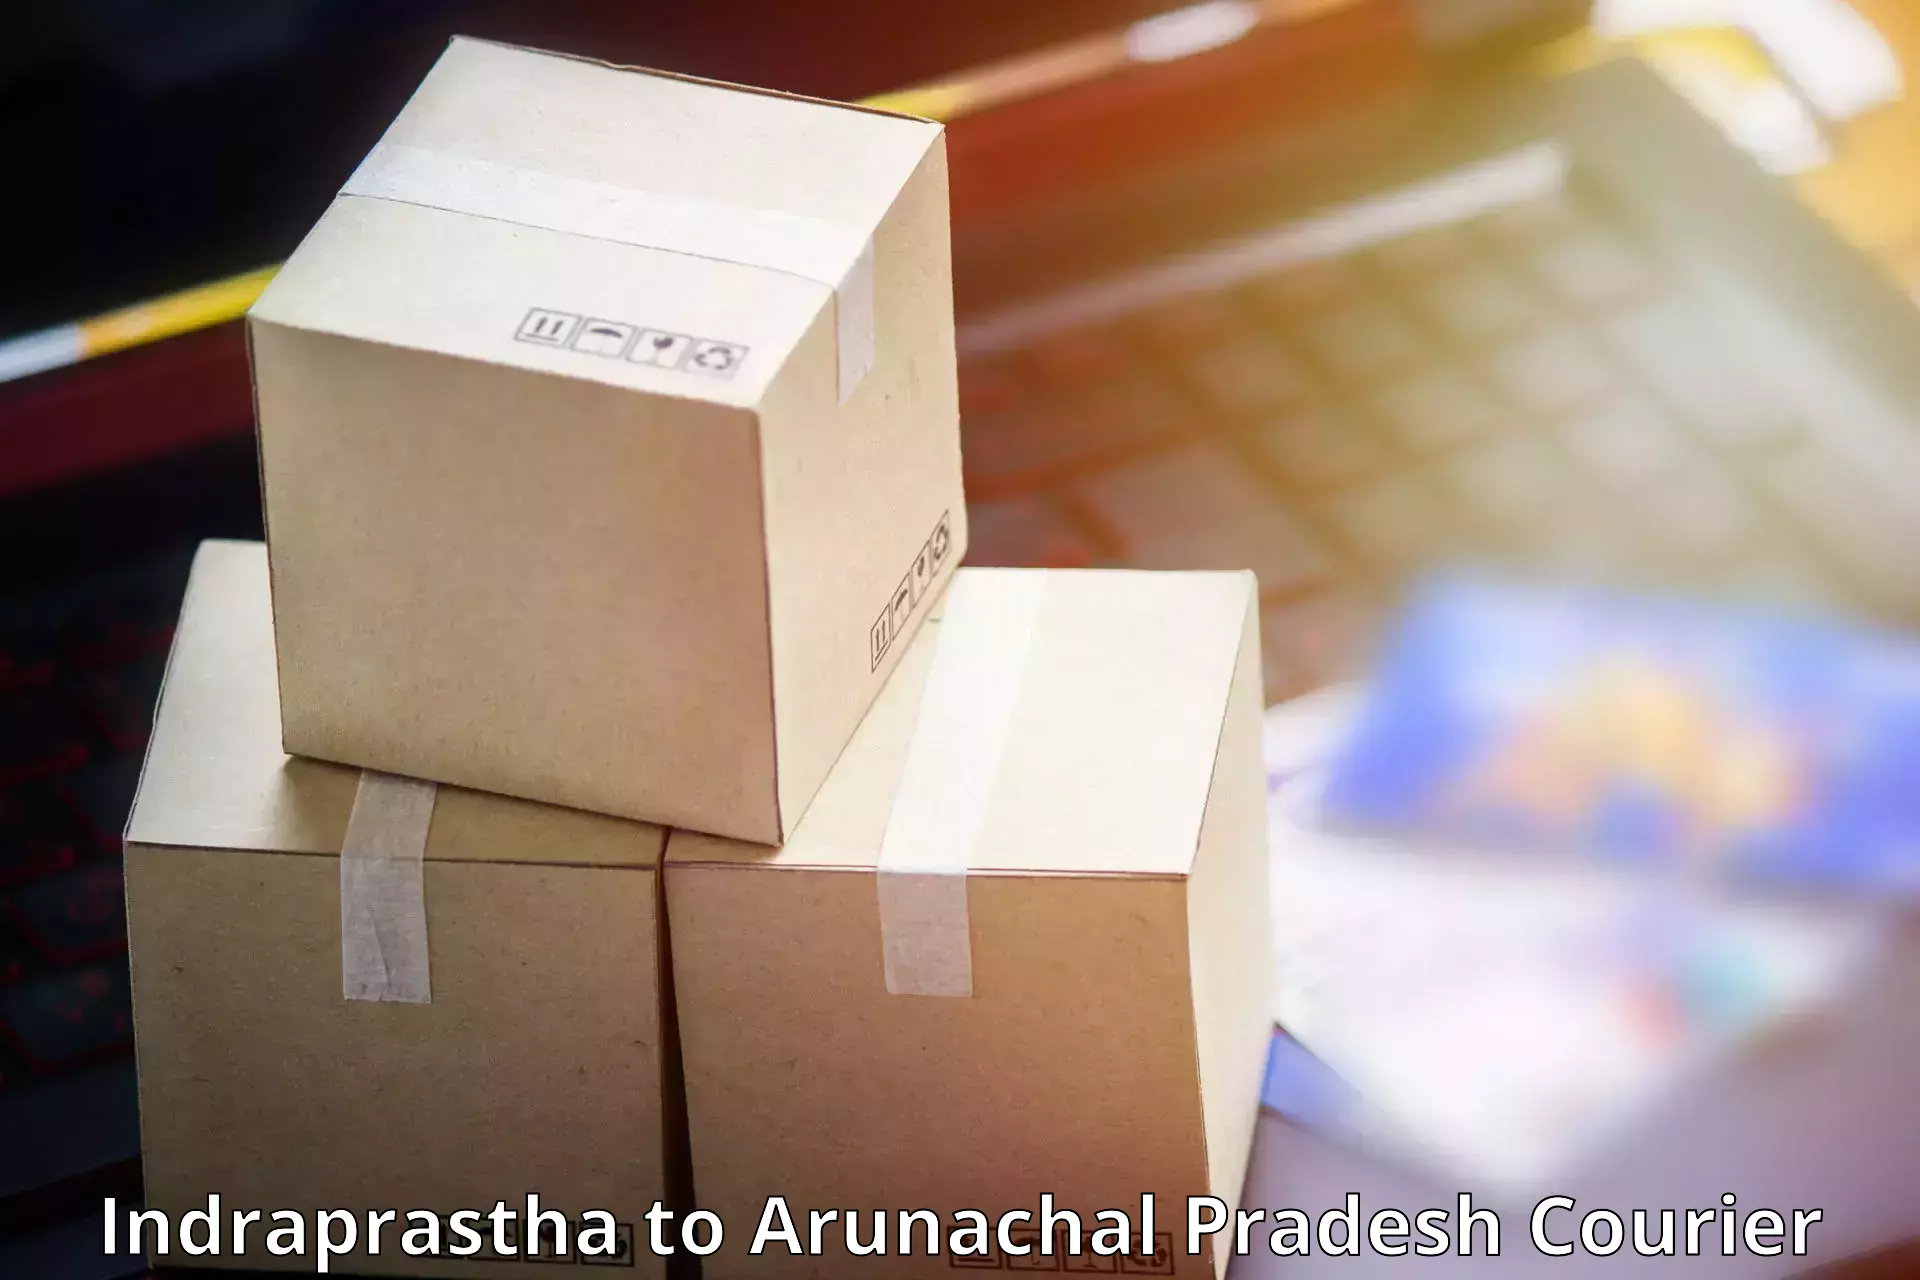 Business delivery service Indraprastha to Lohit